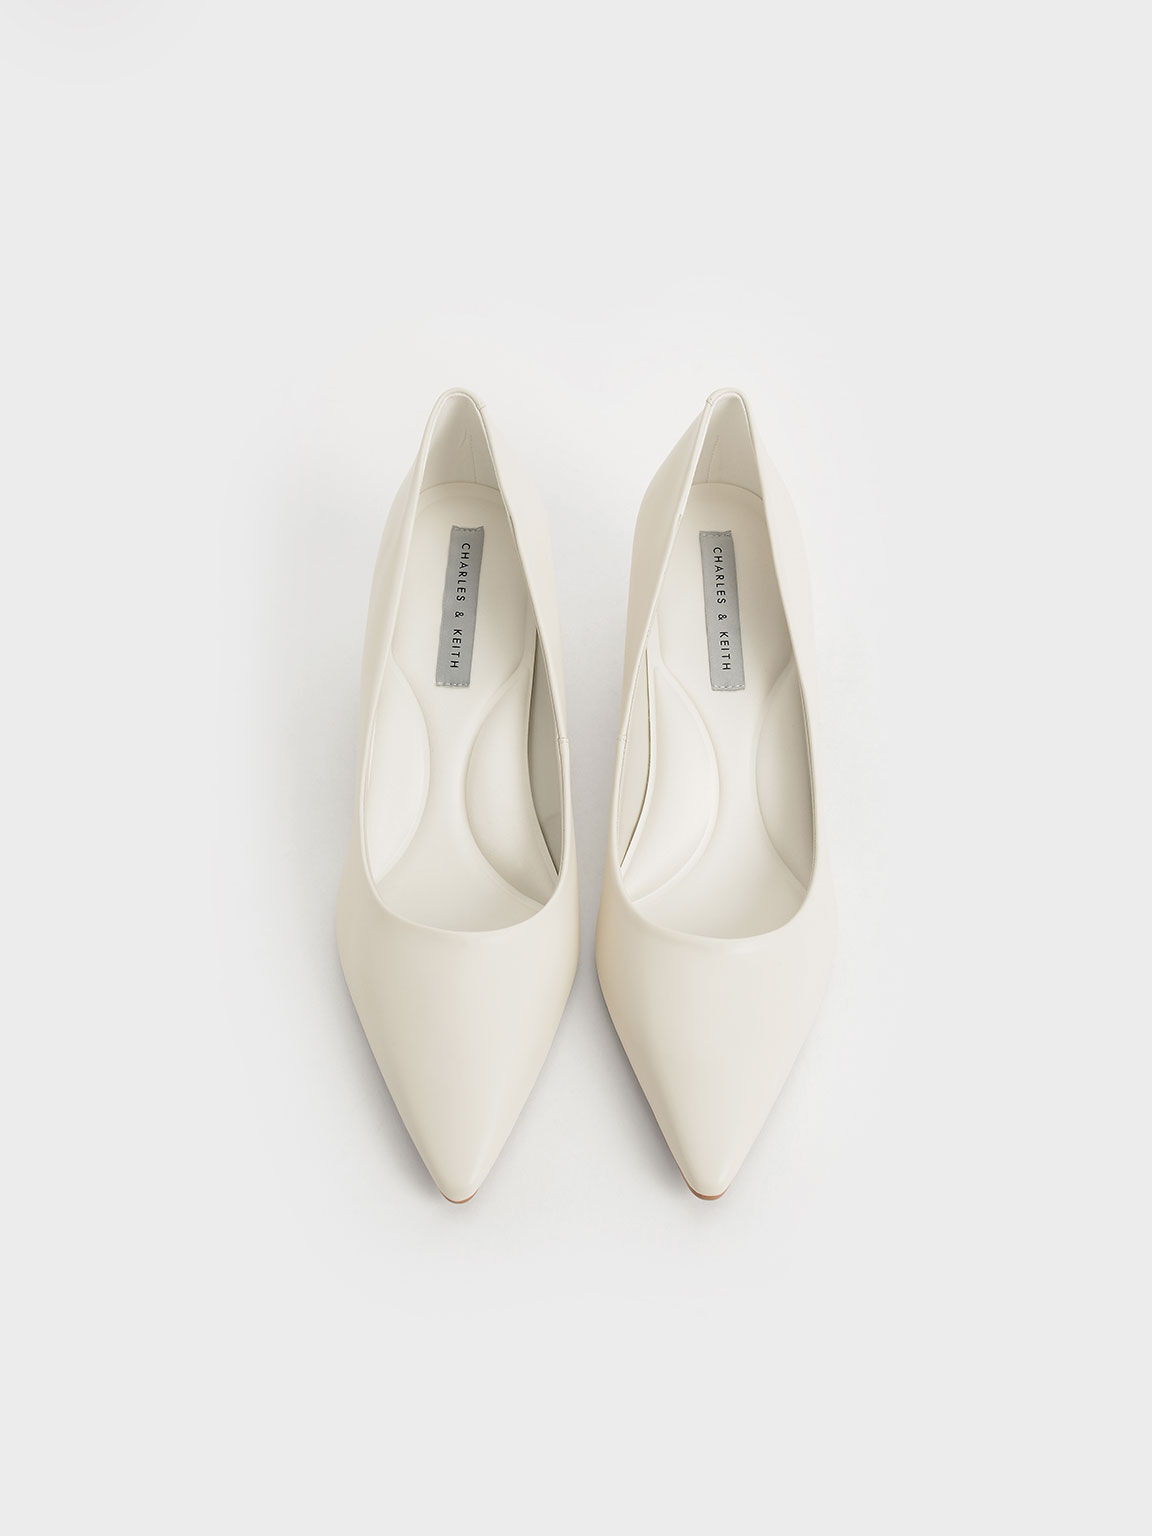 Nude Emmy Pointed Kitten Heel Pumps - CHARLES & KEITH US